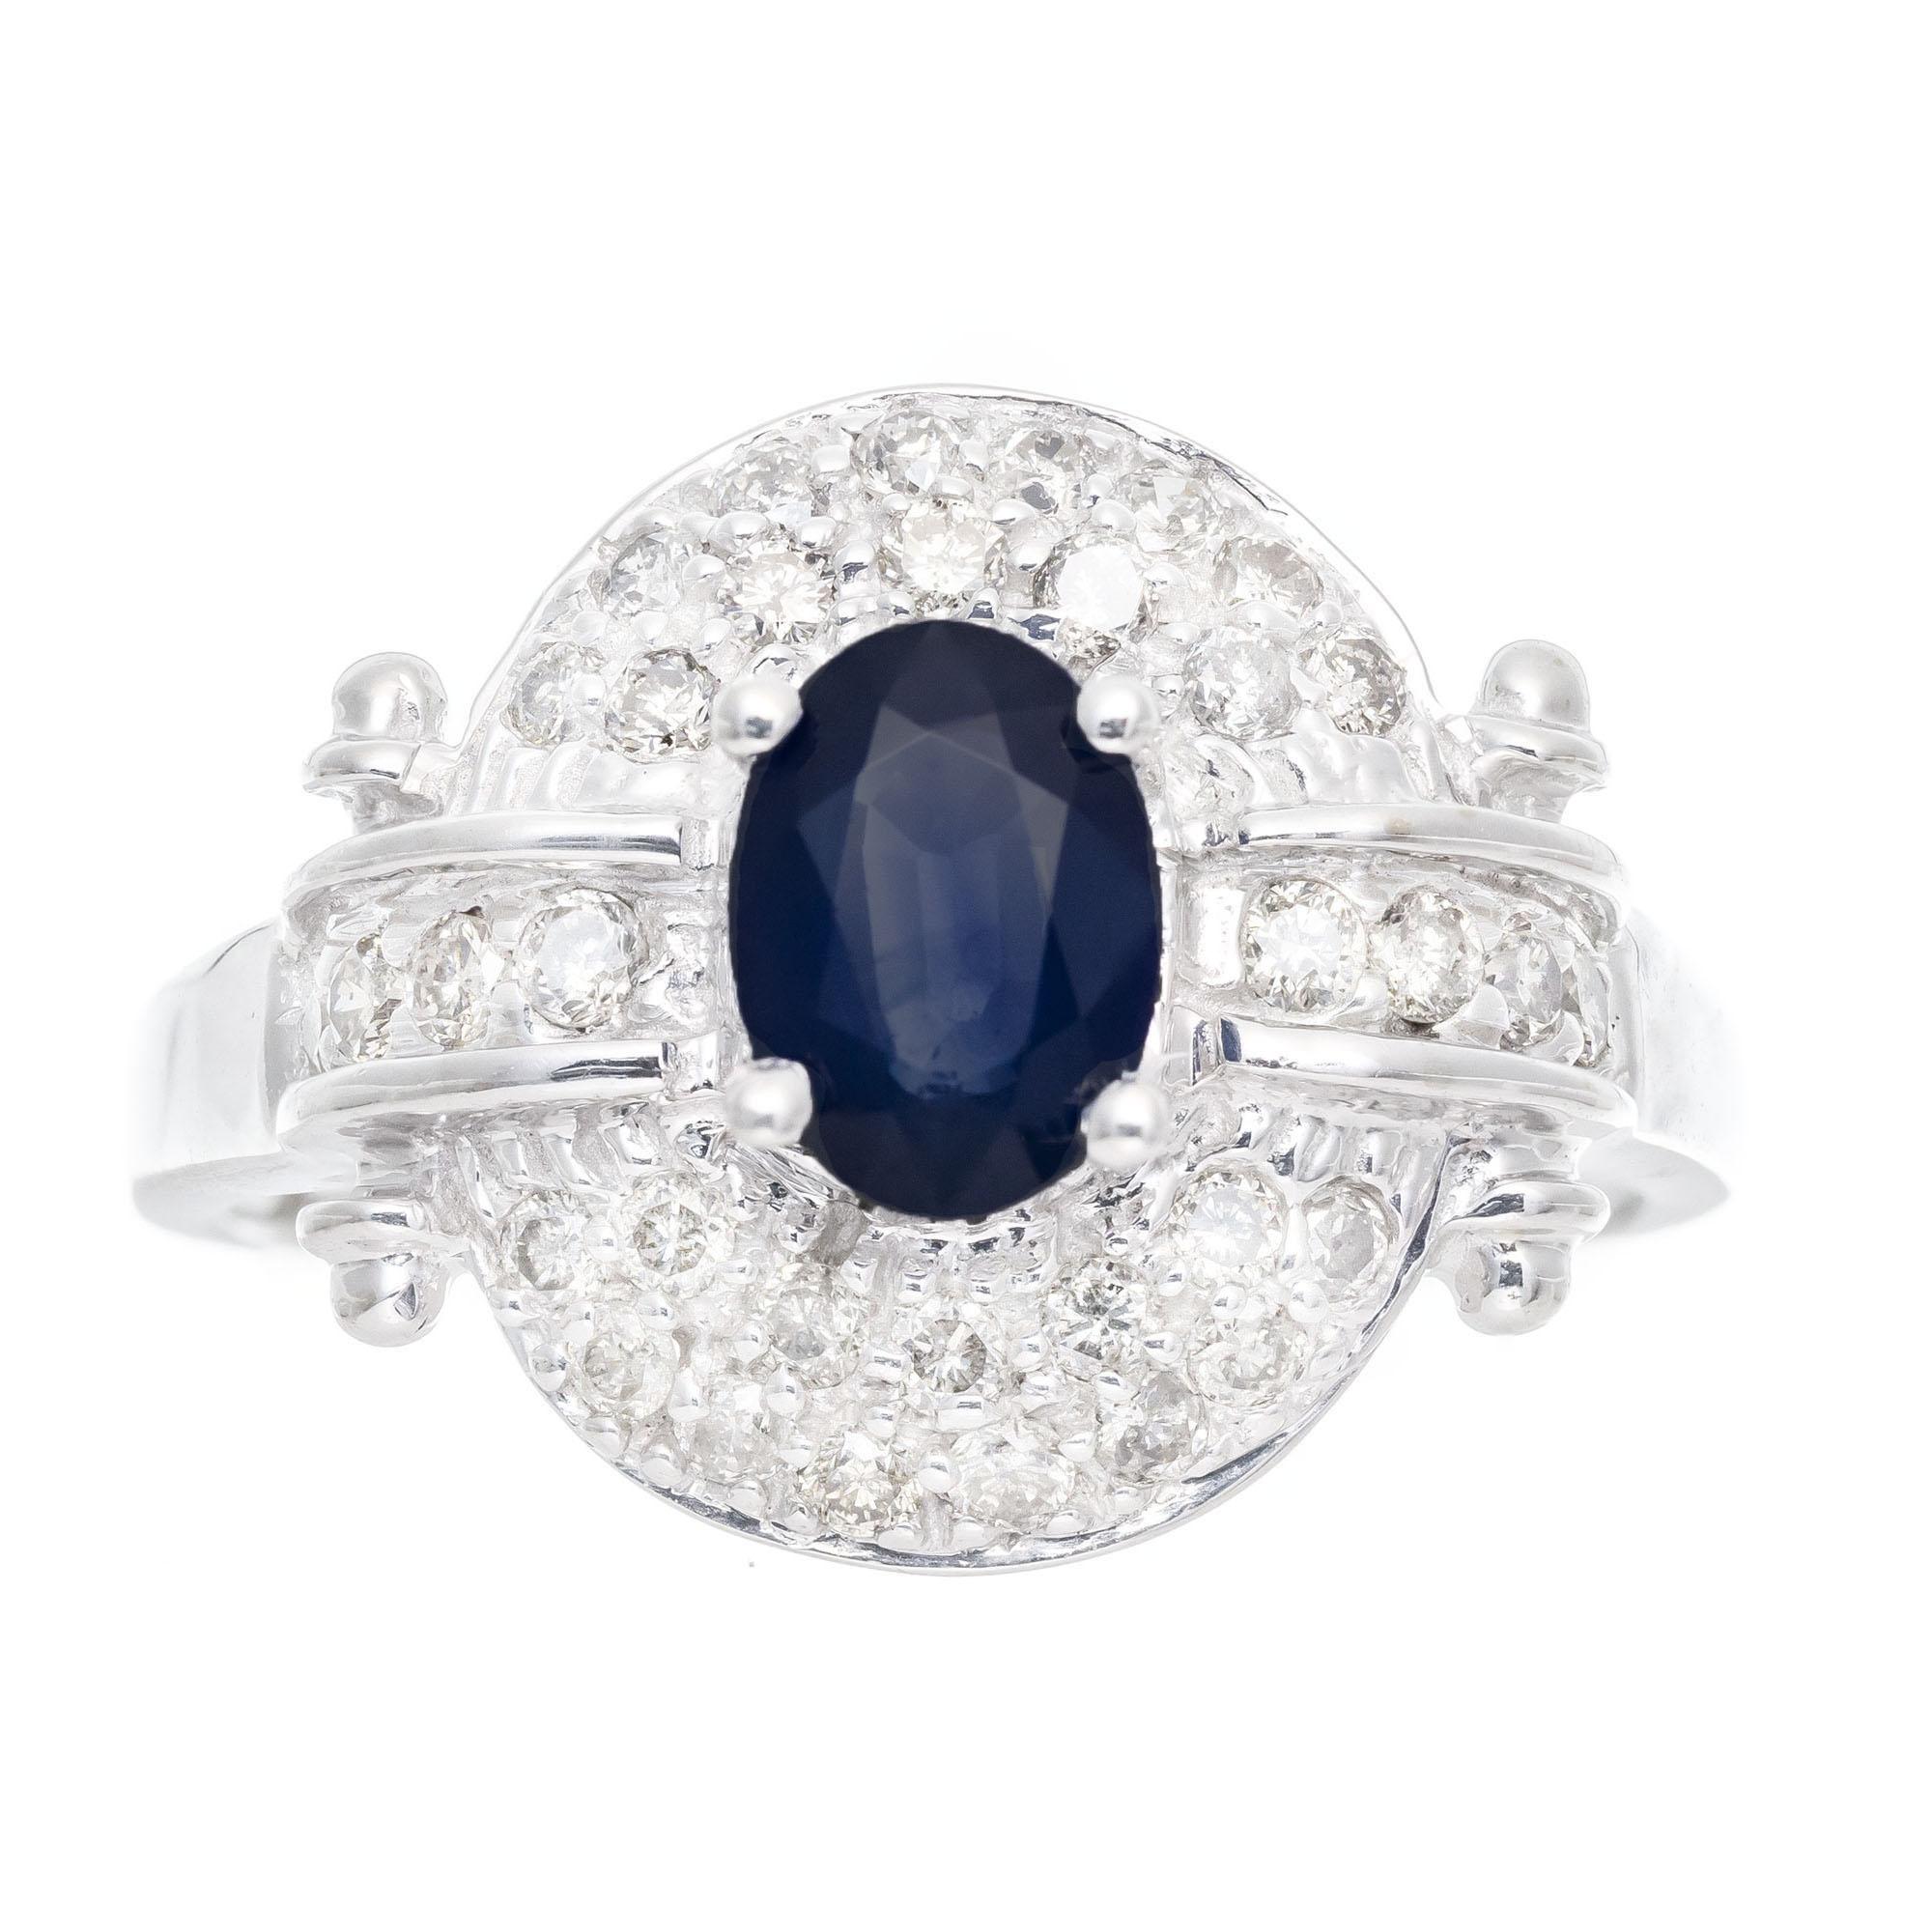 Oval 0.65 carat blue sapphire and brilliant cut diamond cocktail ring. Oval cut center sapphire with a halo of round cut diamonds in a 14k white gold setting. 

1 oval cut blue sapphire, SI approx. .65cts
34 round brilliant cut diamonds, I-J SI